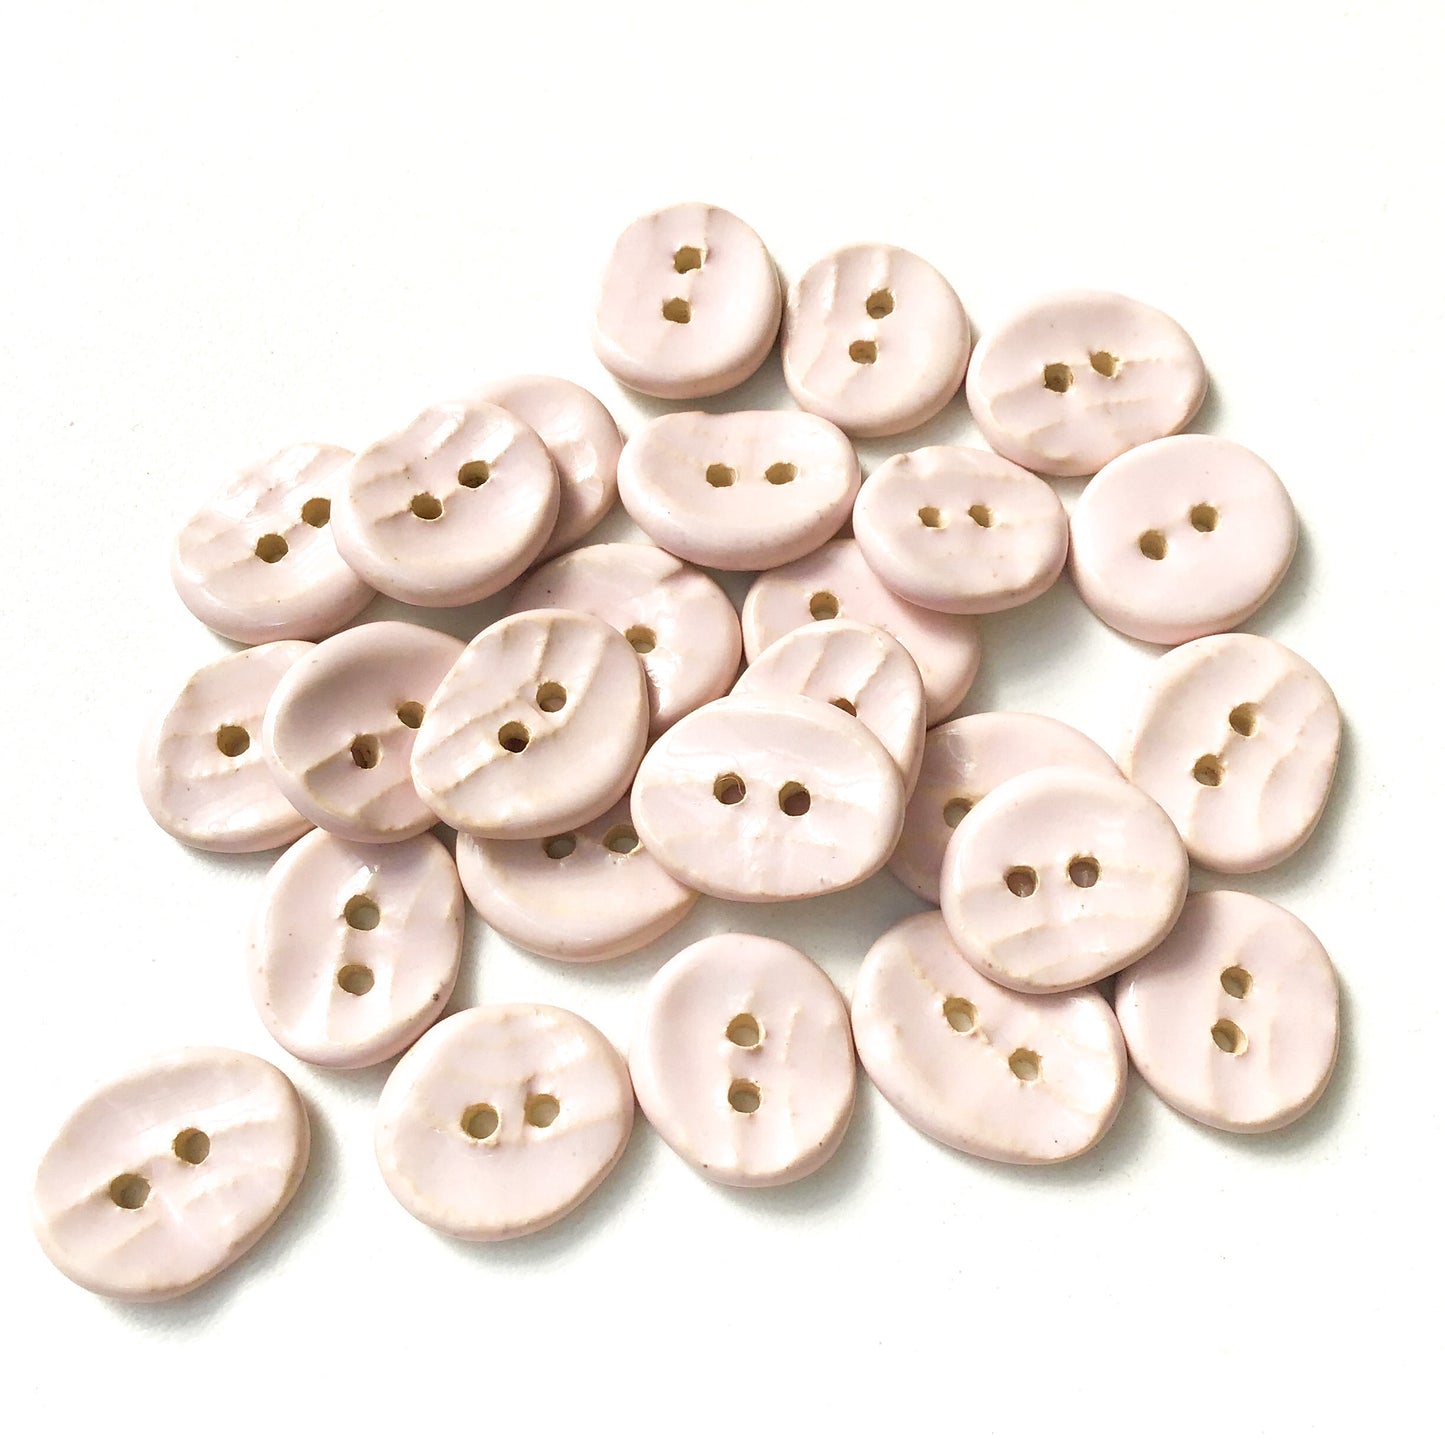 Soft Pink Ceramic Buttons - Light Pink Clay Buttons - 3/4" x 5/8"